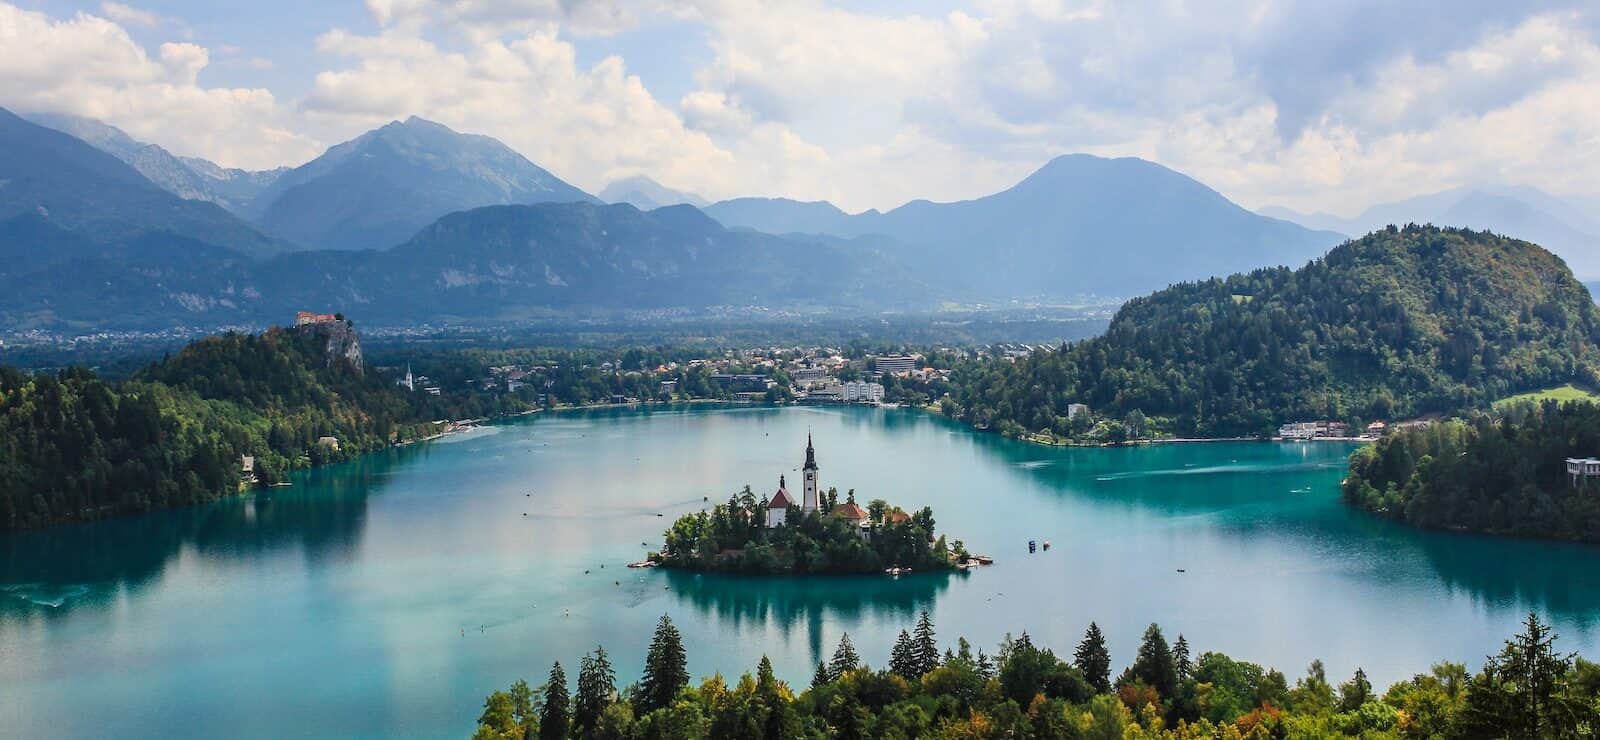 high-angle photography of white church on island in middle of Lake Bled